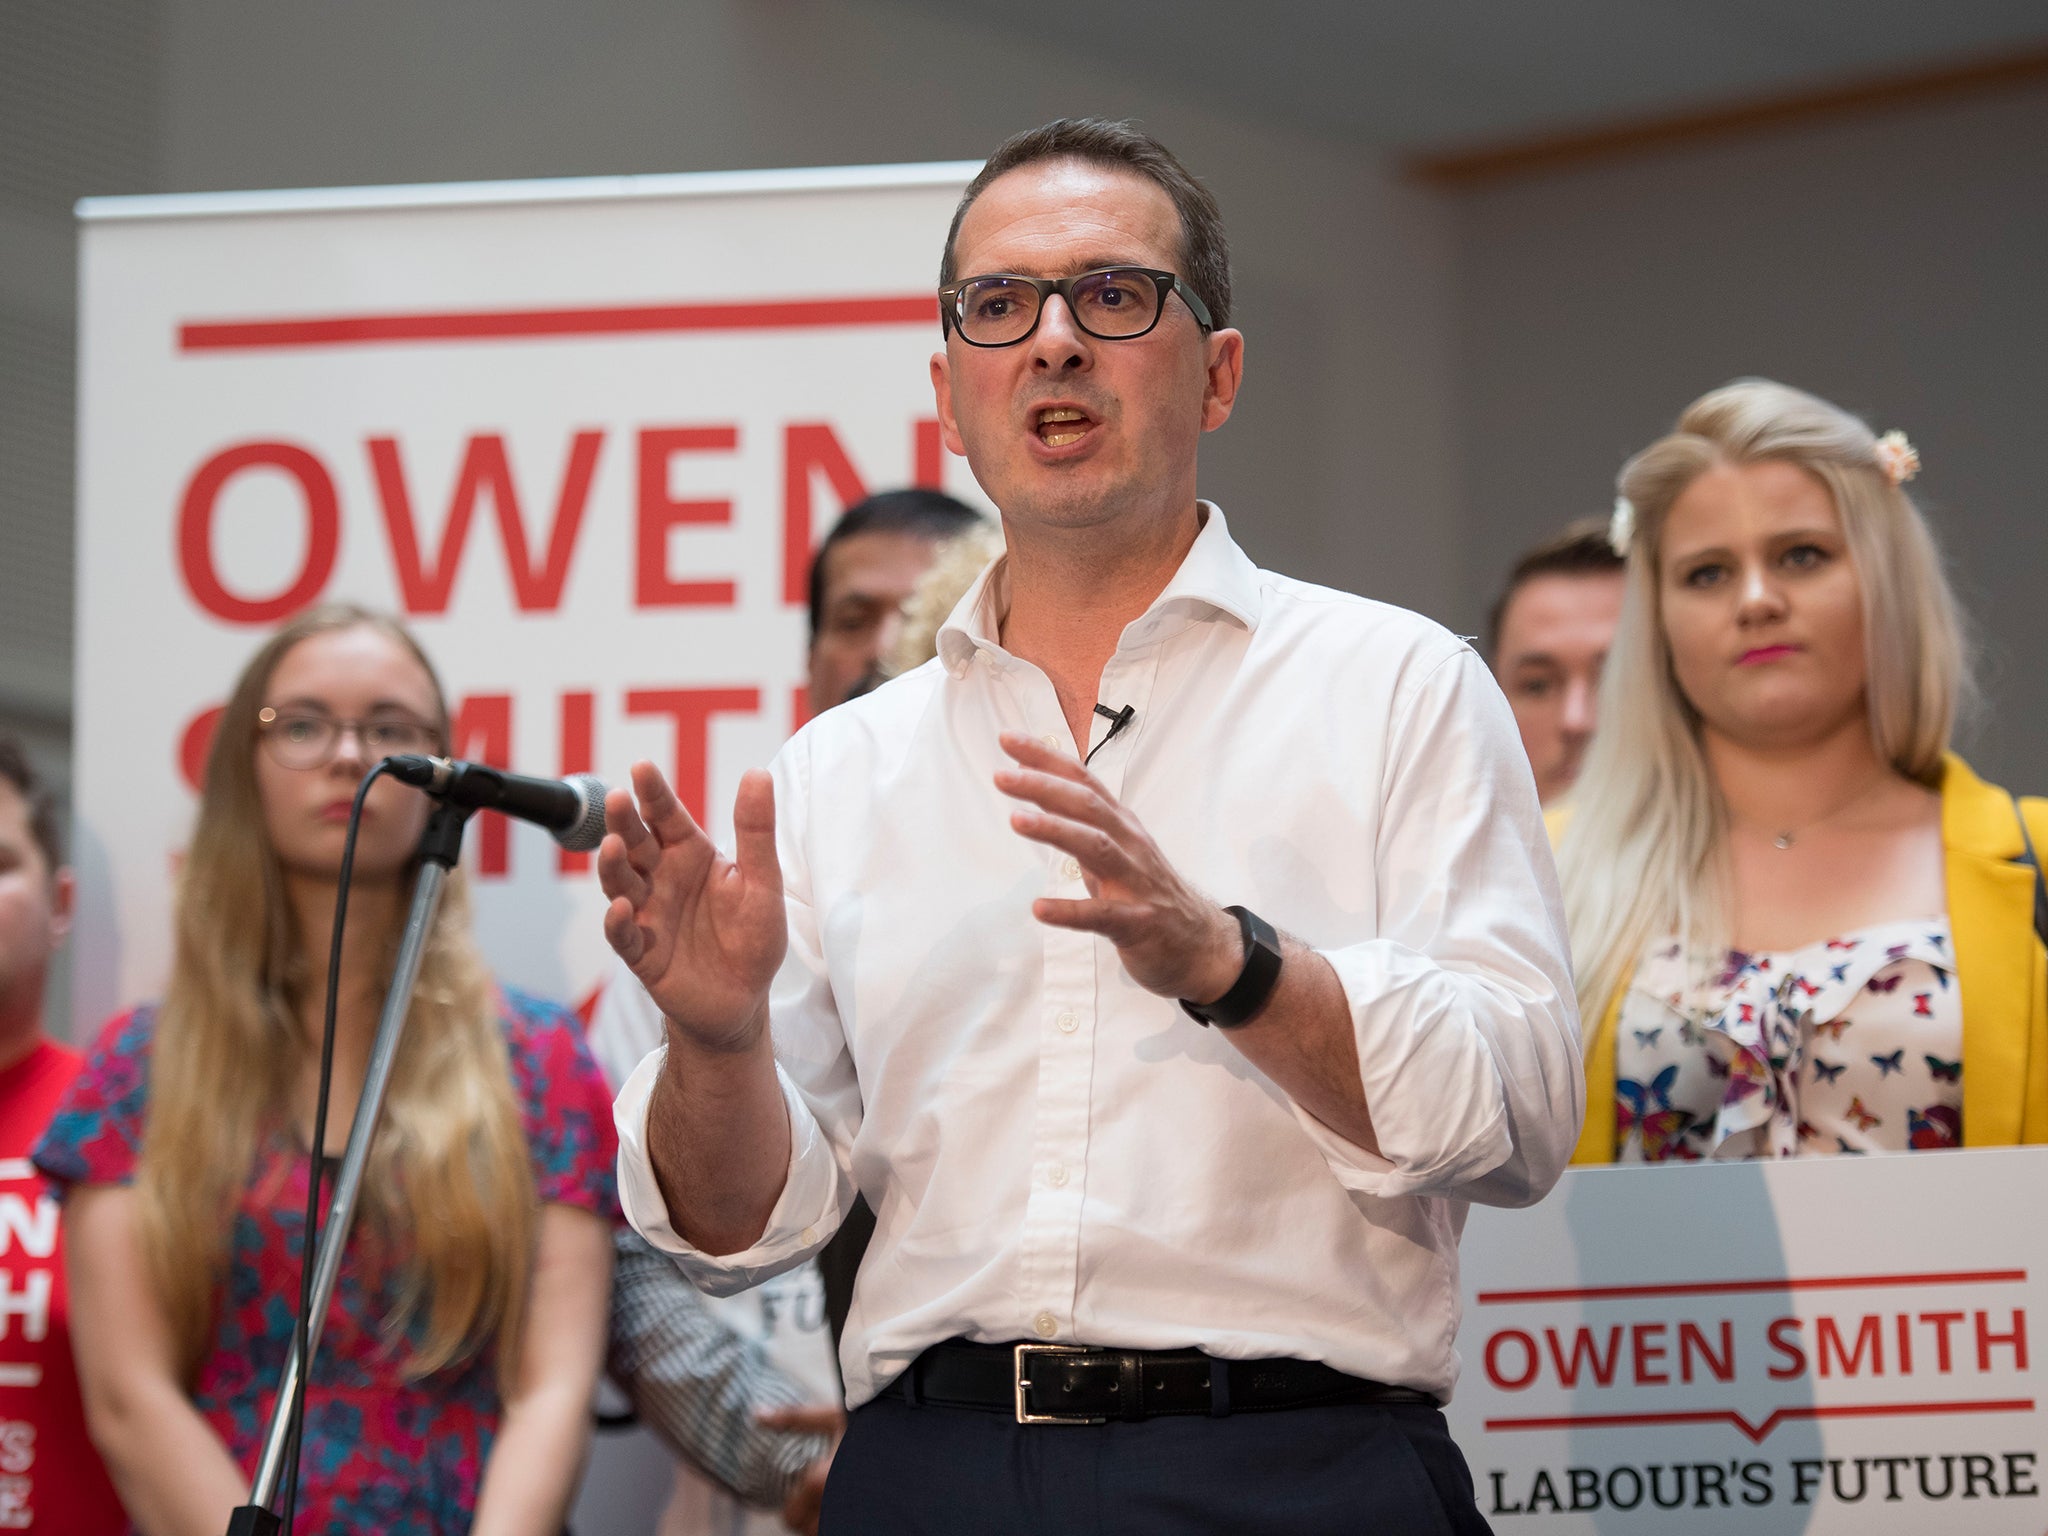 Despite despair with Mr Corbyn, party chairs barely mentioned Owen Smith's challenge